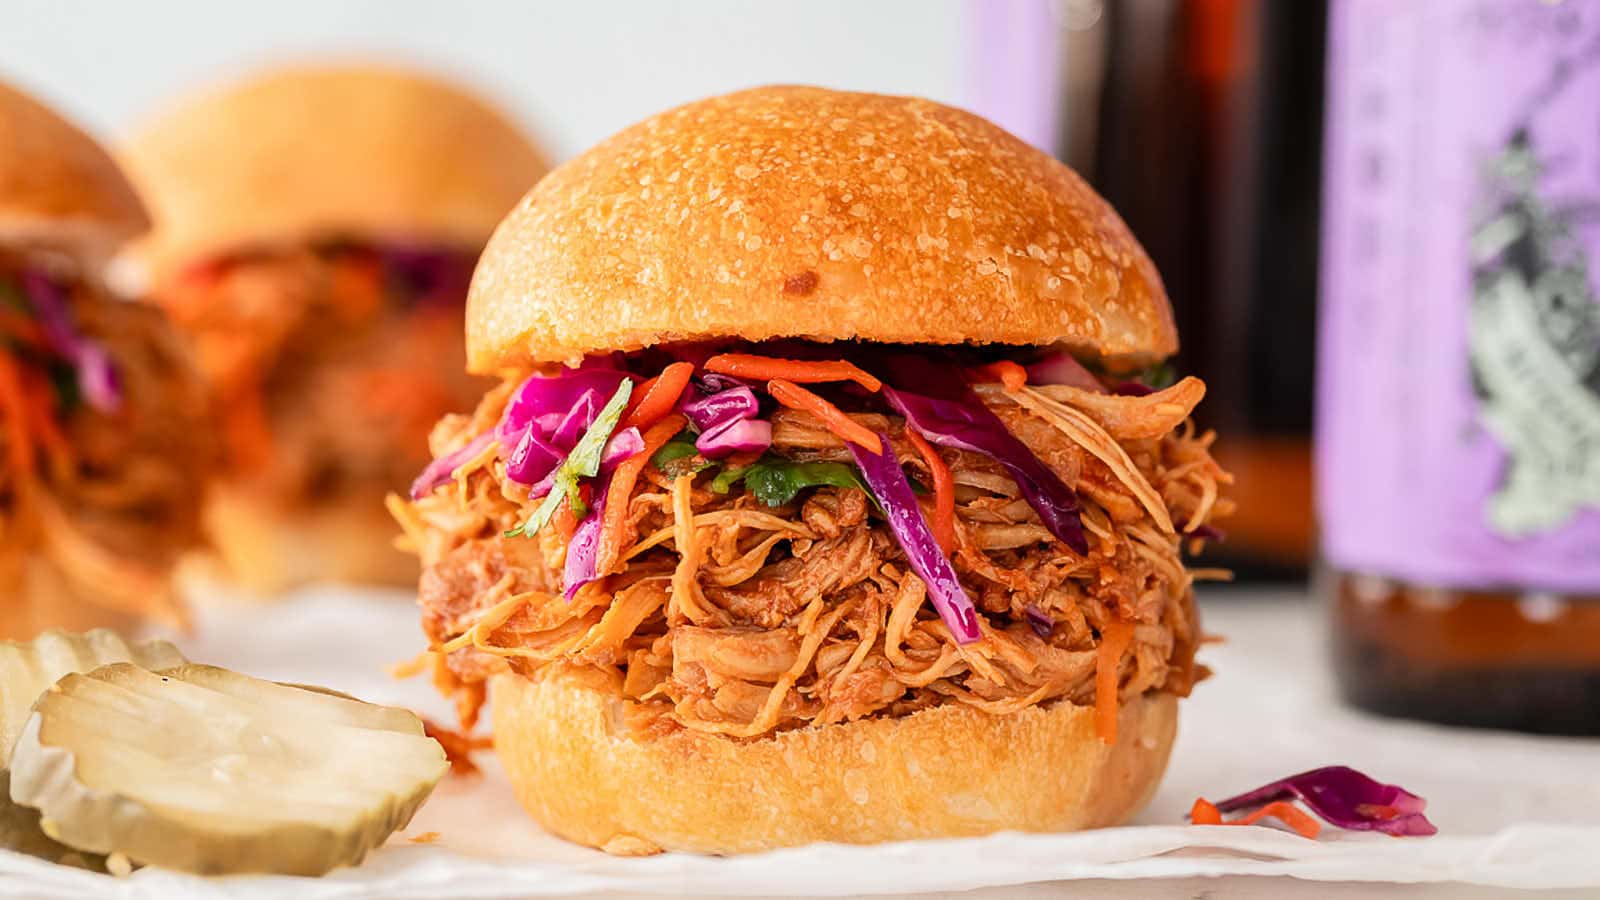 Slow Cooker Pulled Chicken Sliders recipe by Cheerful Cook.